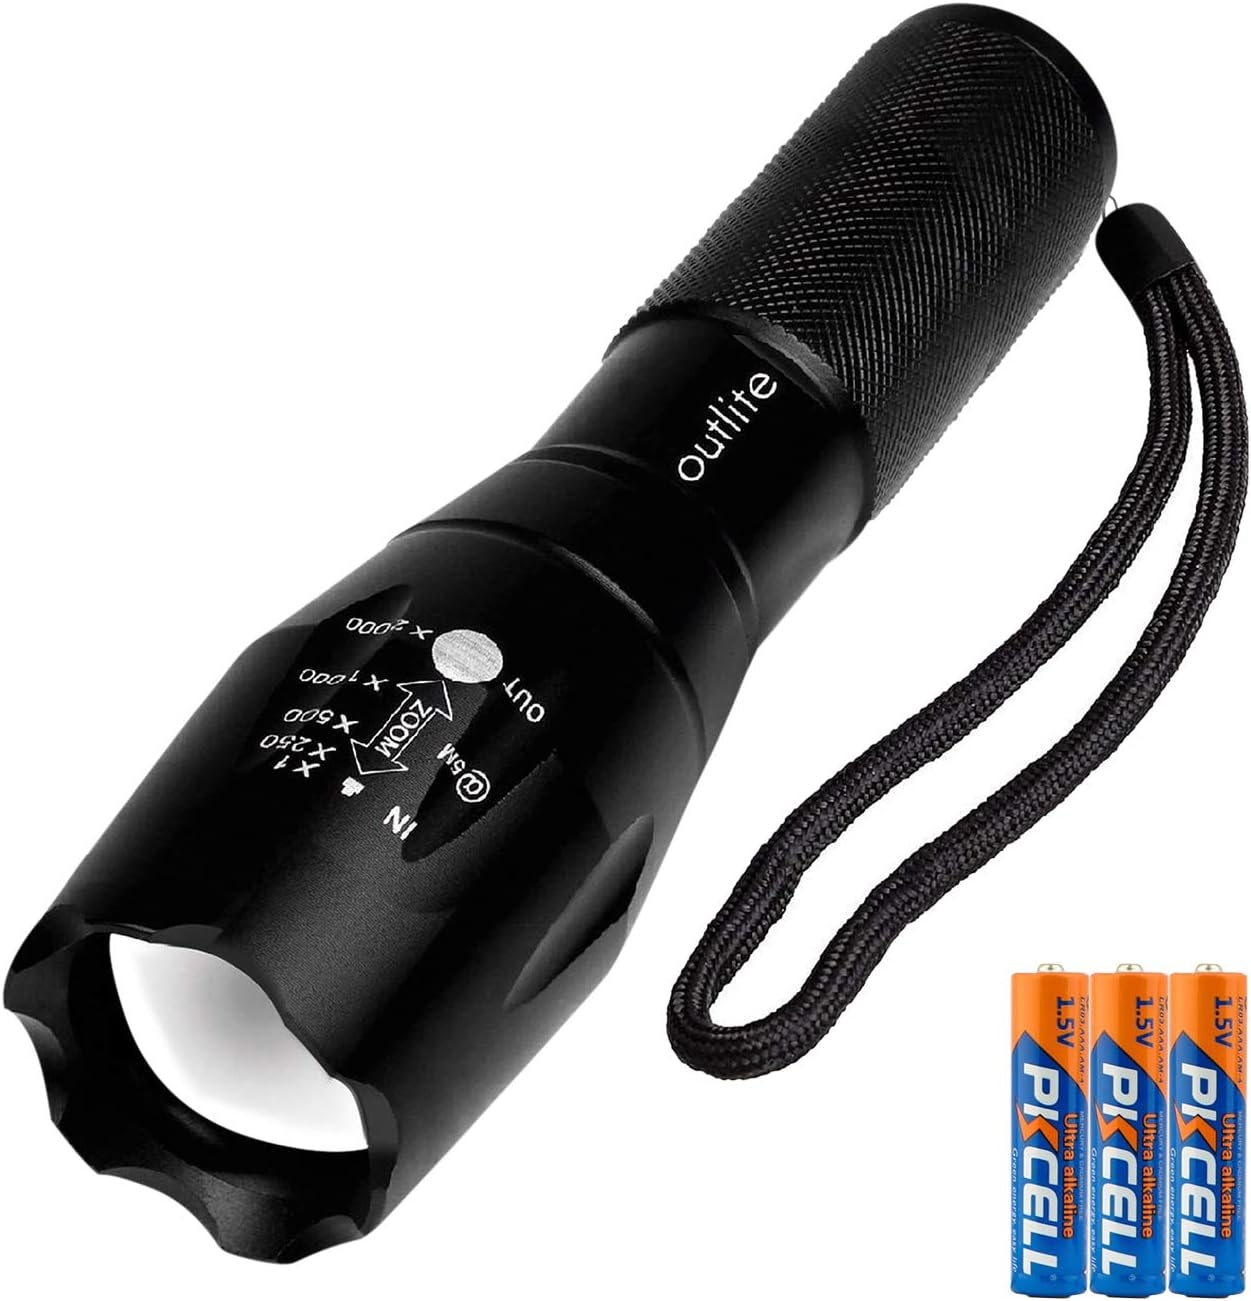 outlite A100 Portable 2000 Lumens Handheld LED Flashlight with Adjustable Focus and 5 Light Modes, Outdoor Water Resistant Flashlights High Lumens, Tactical Flashlight for Camping Hiking Emergency